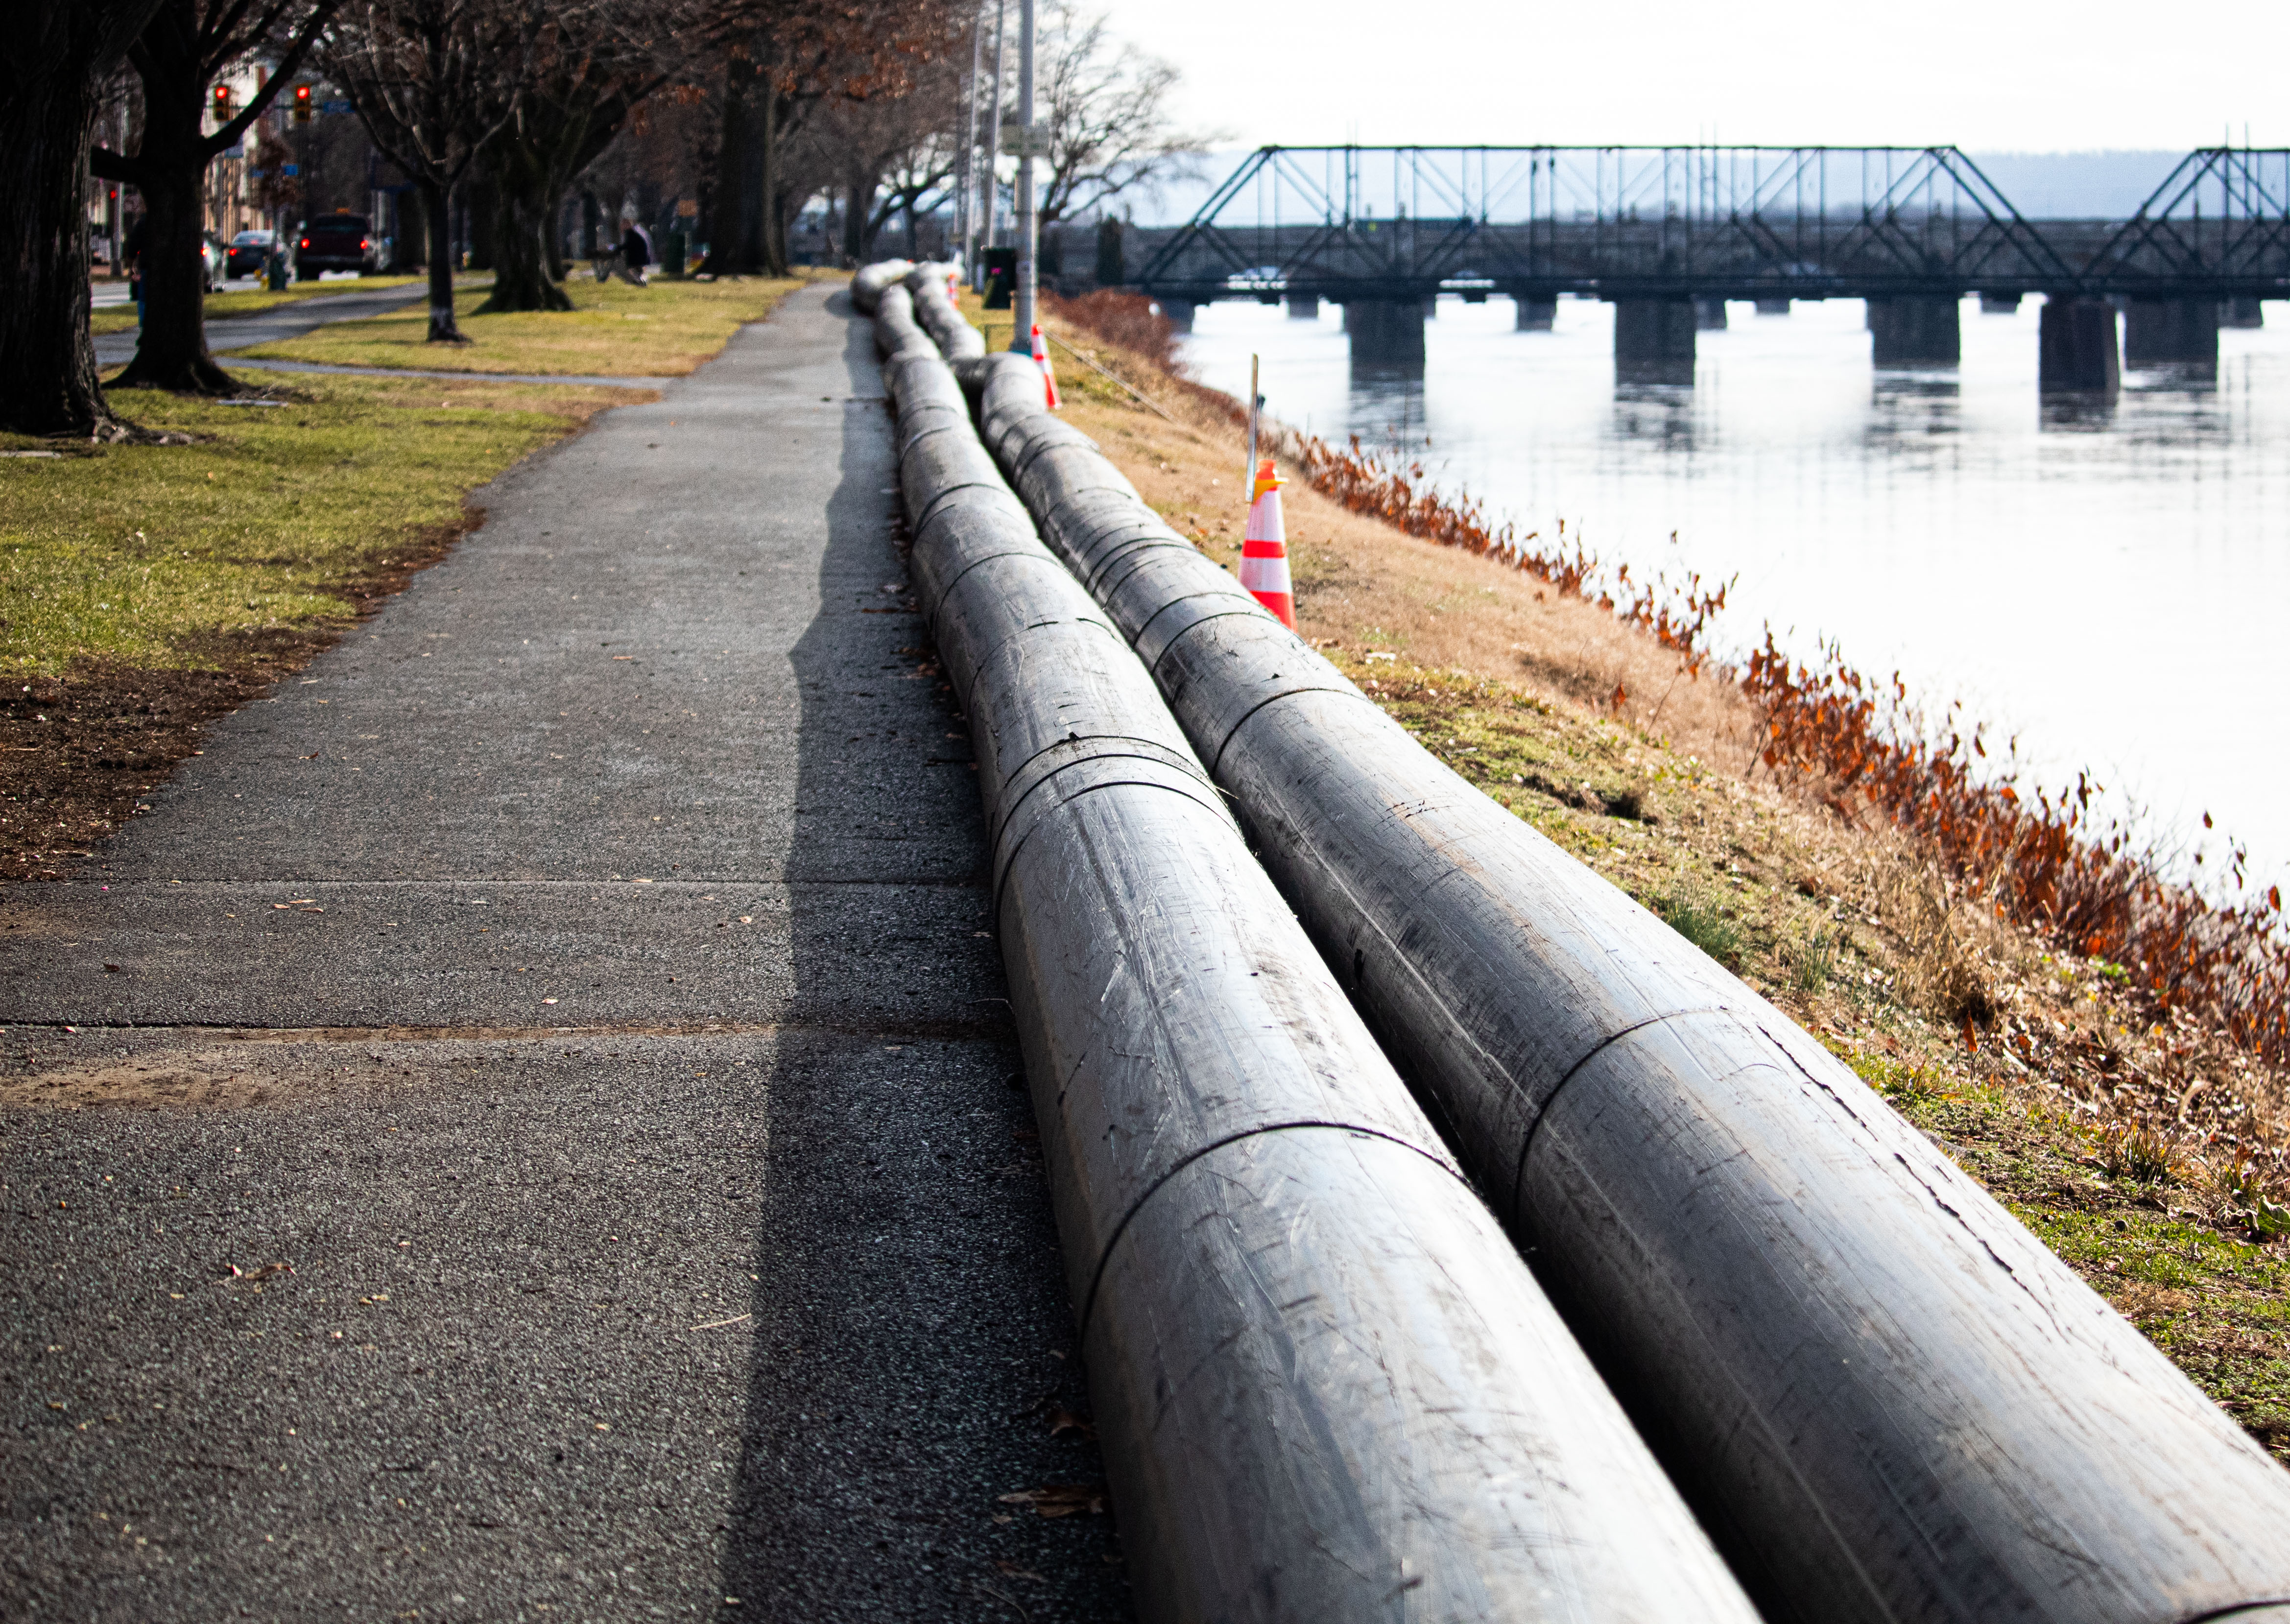 What are along Front in Harrisburg? giant Street those pipes